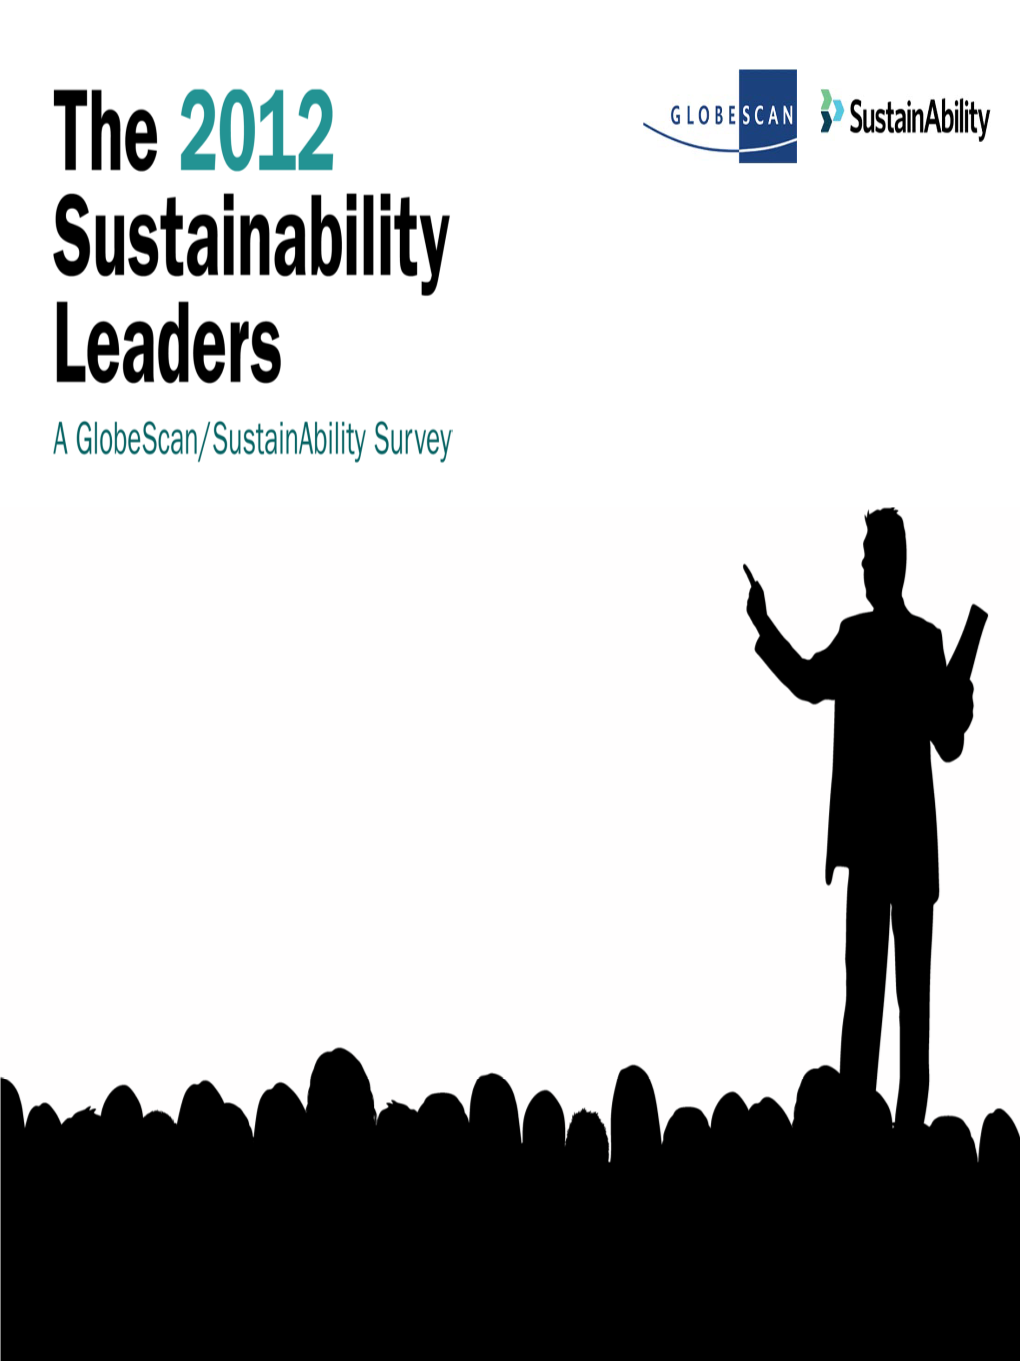 The 2012 Sustainability Leaders.Pdf